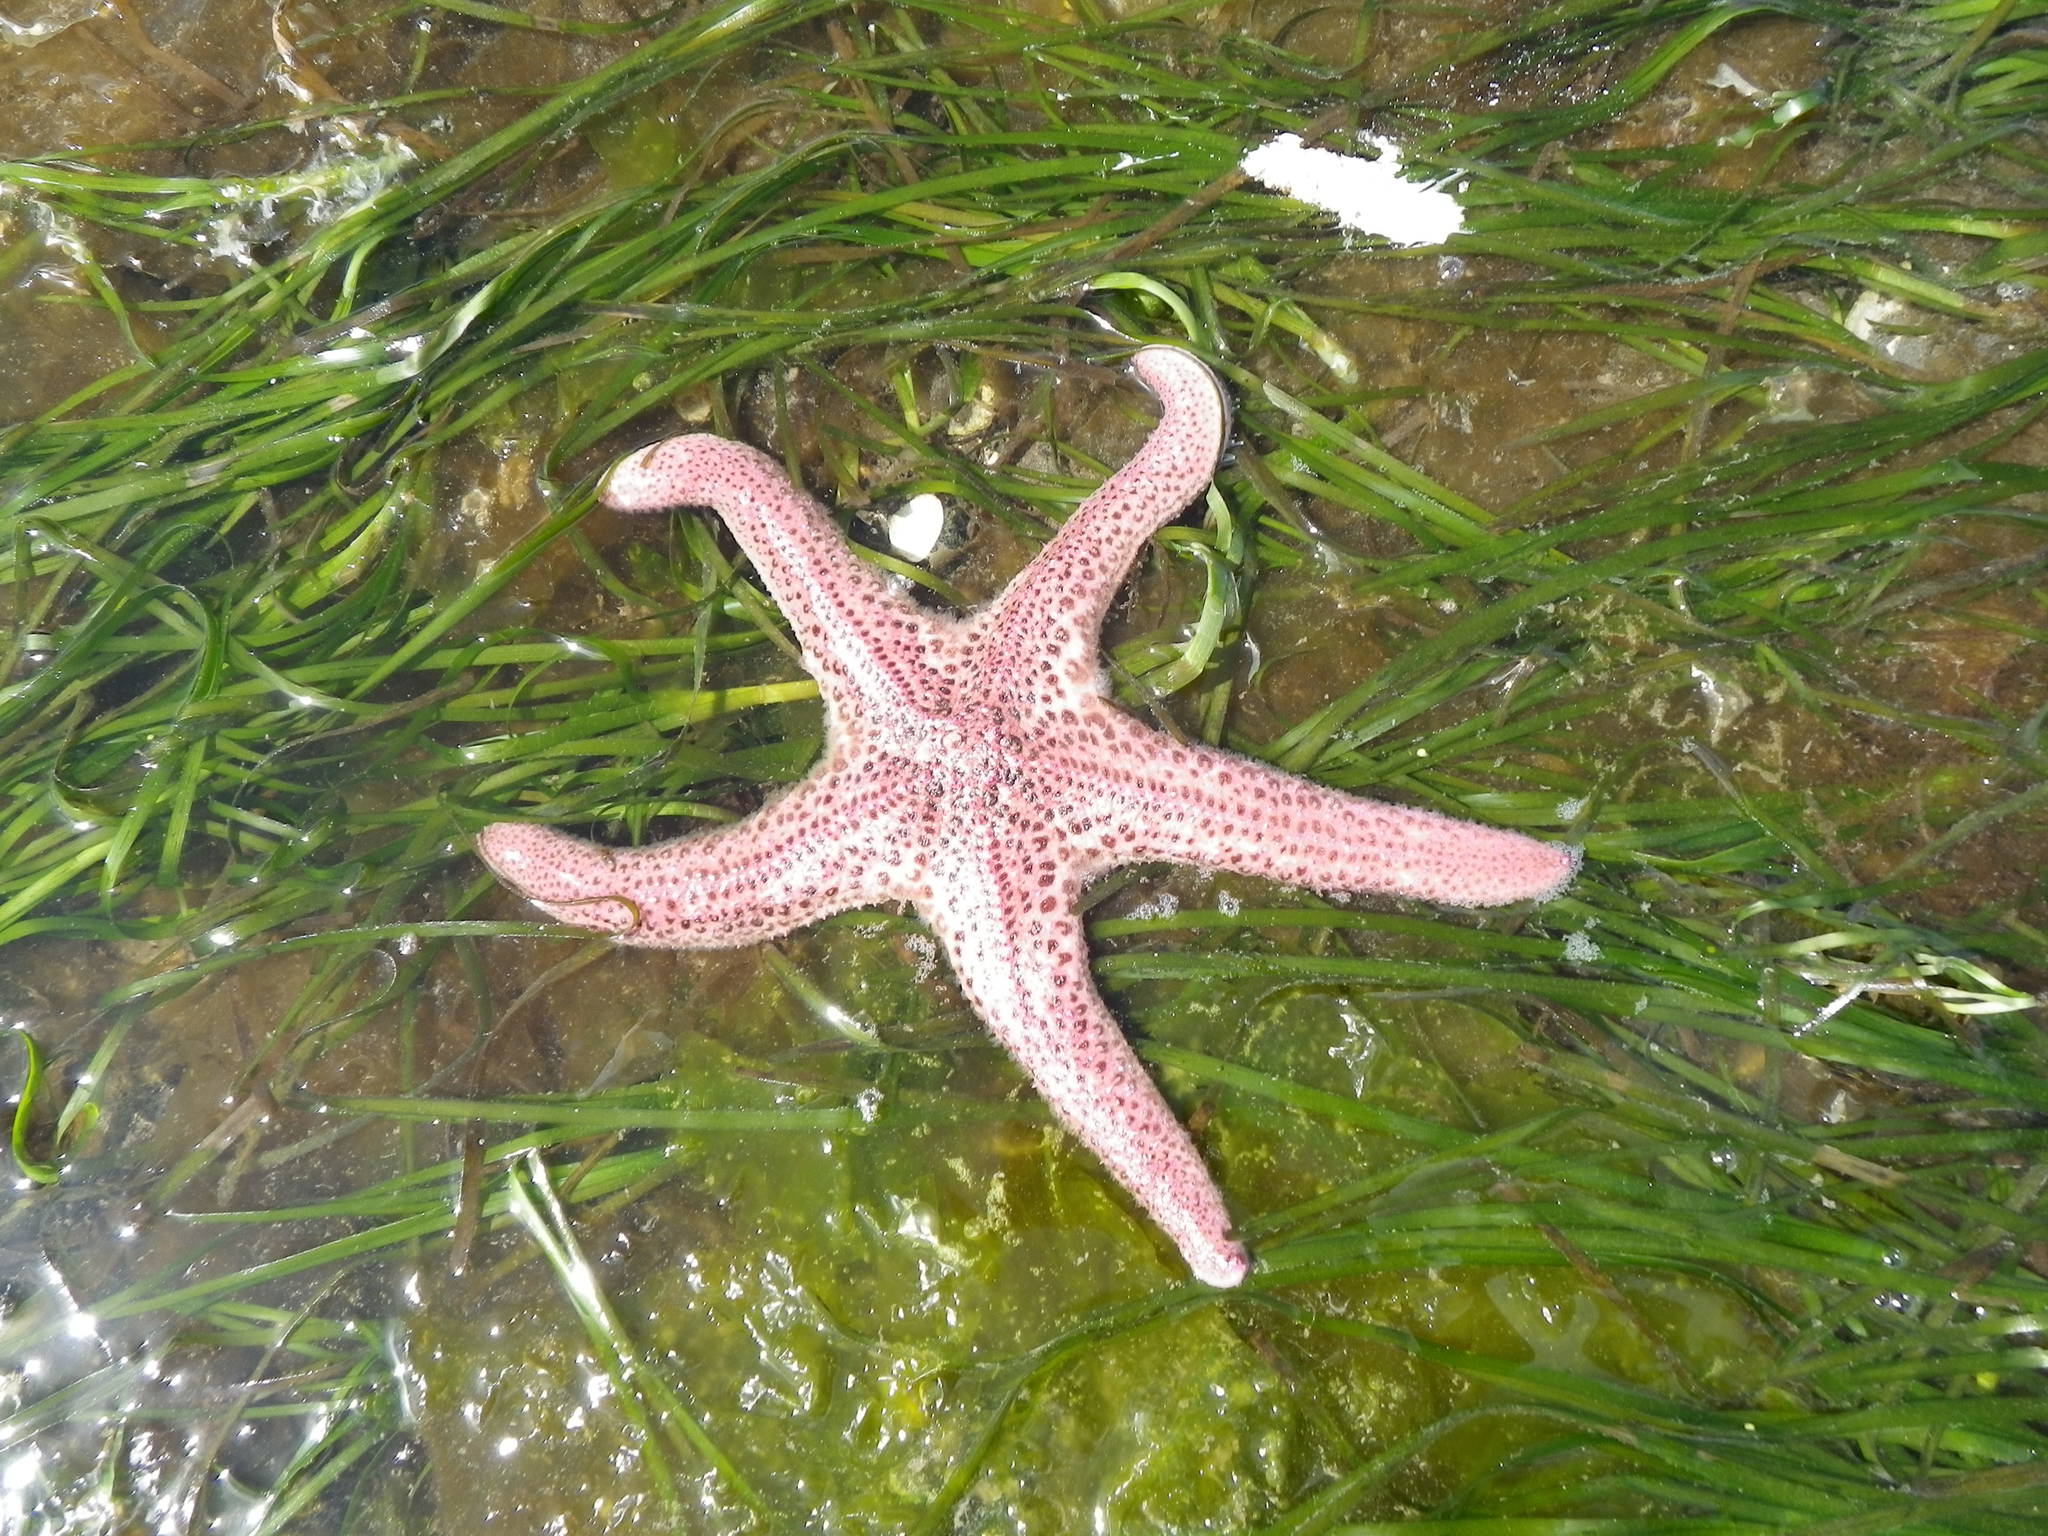 Short-spined sea star named Bertha. Russel Barsh/Contributed photo.